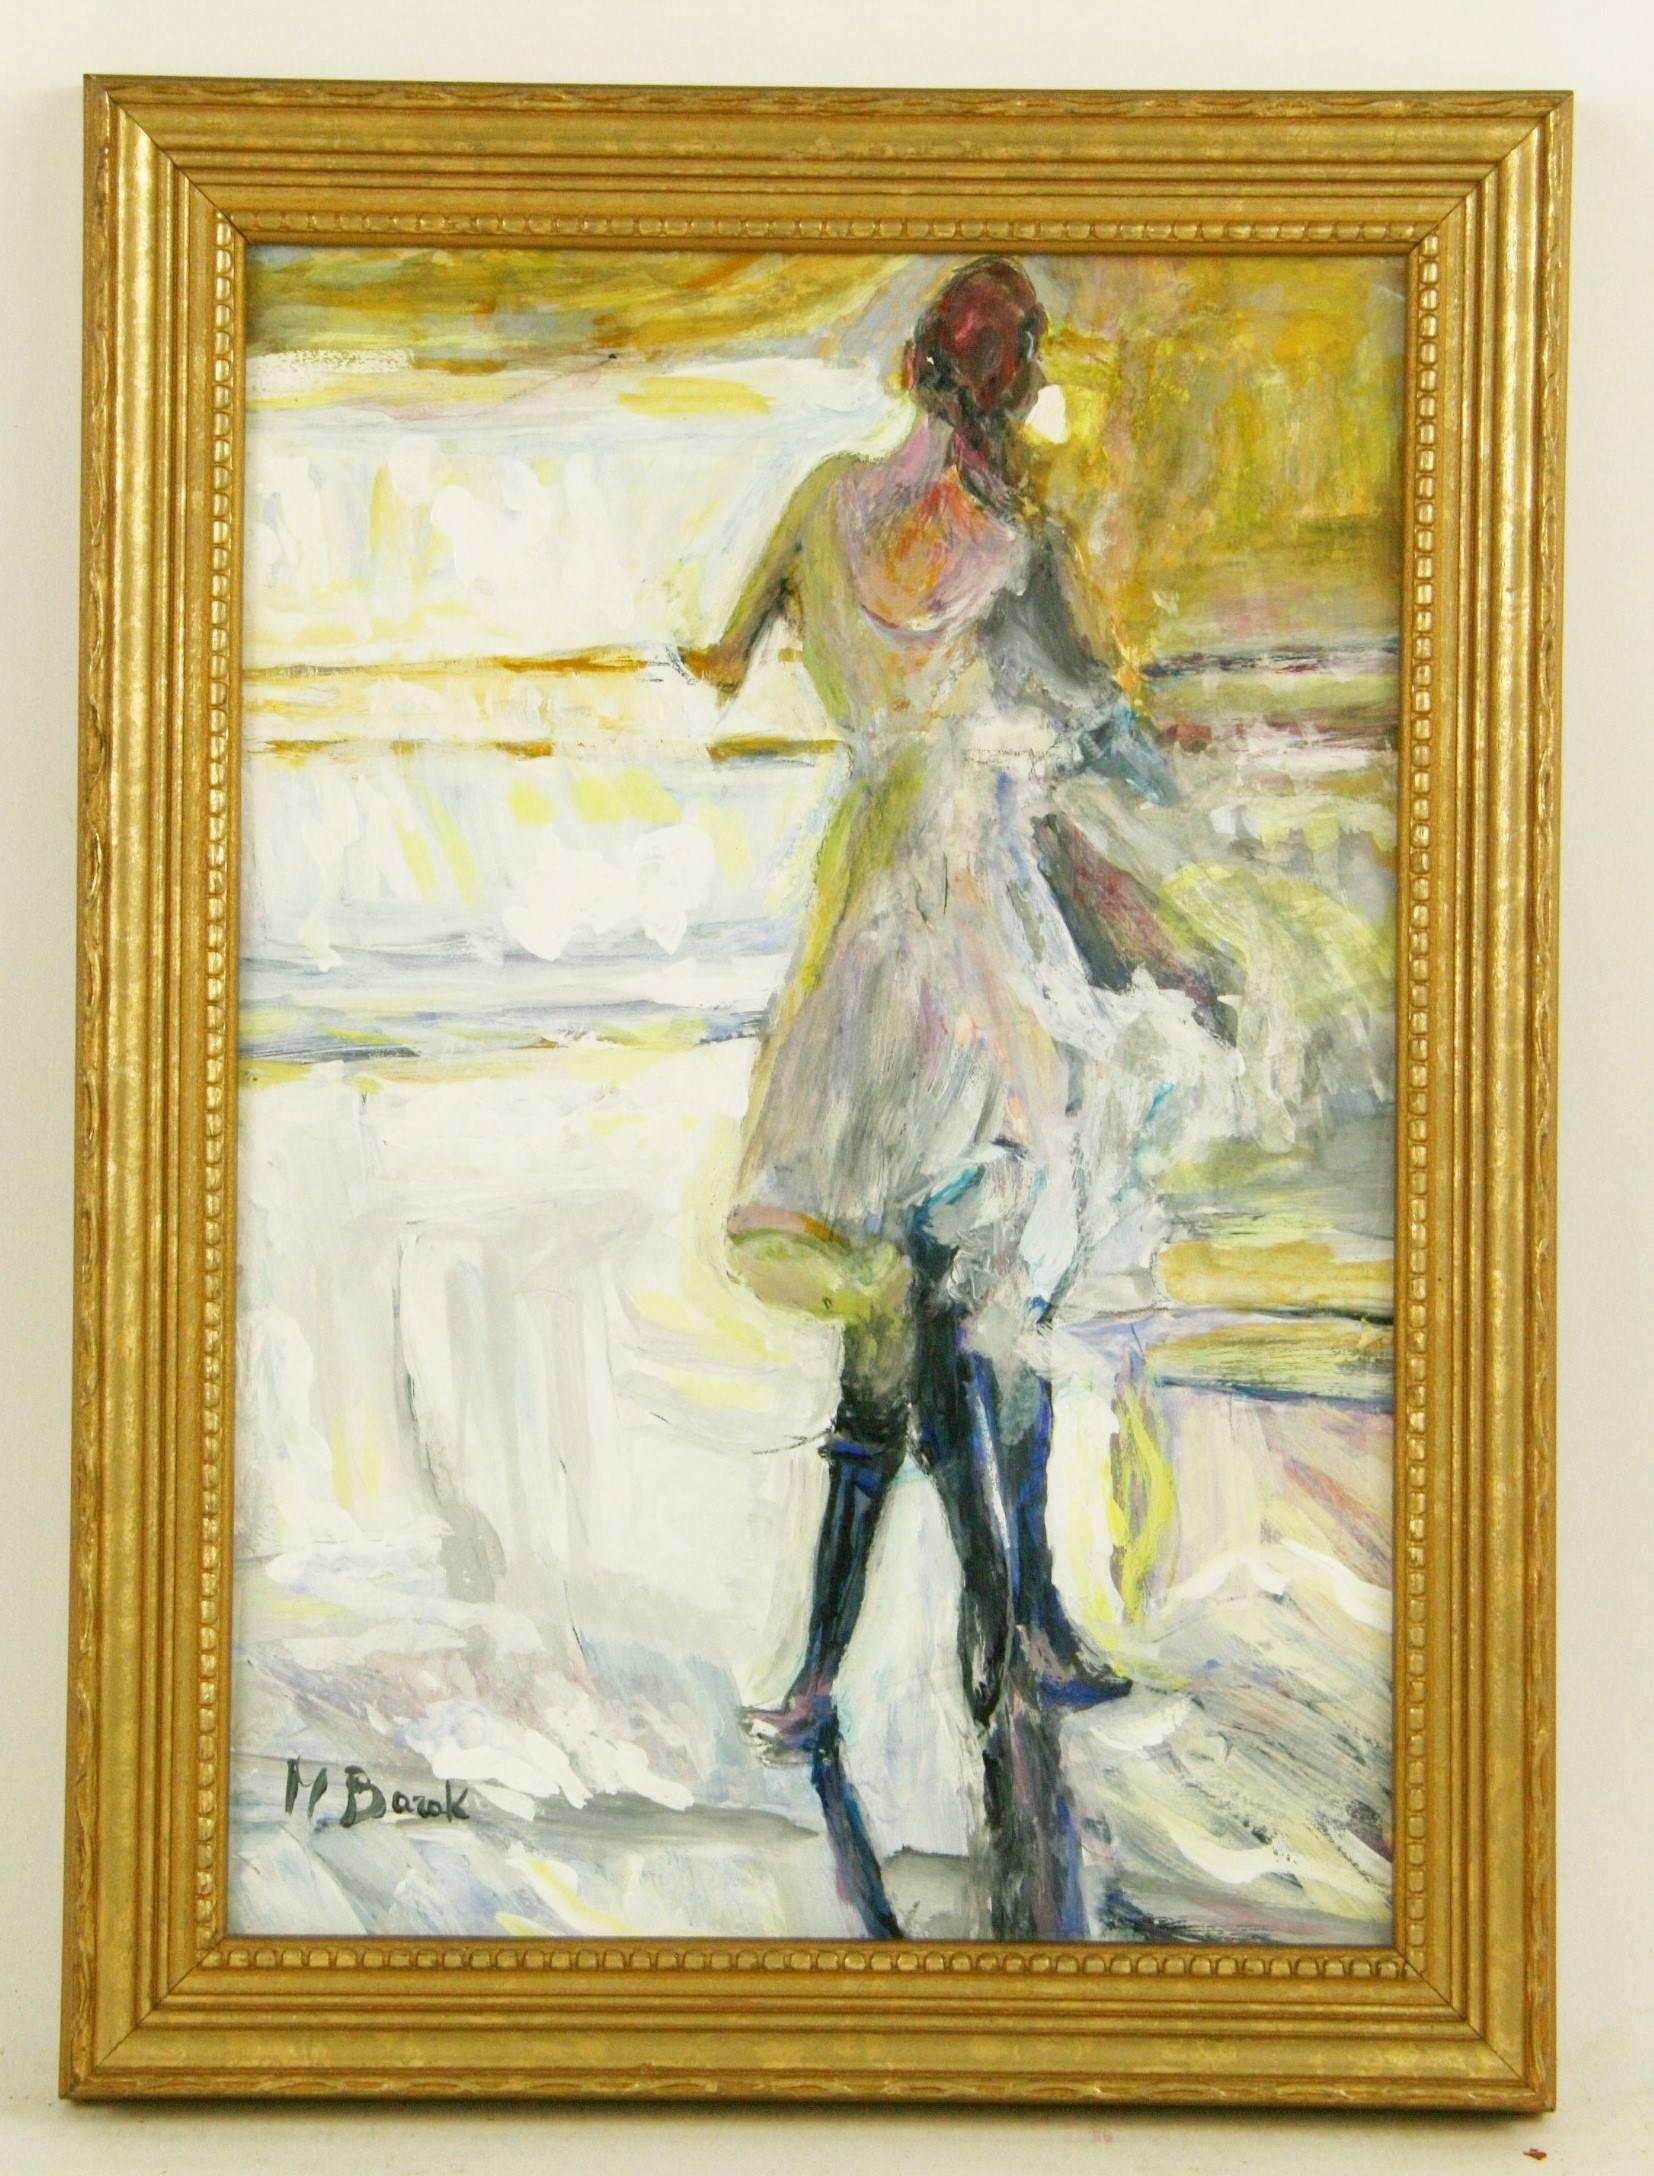 M.Barak Abstract Painting - 20th Century Swedish School "Dancing Together" Figurative  Painting